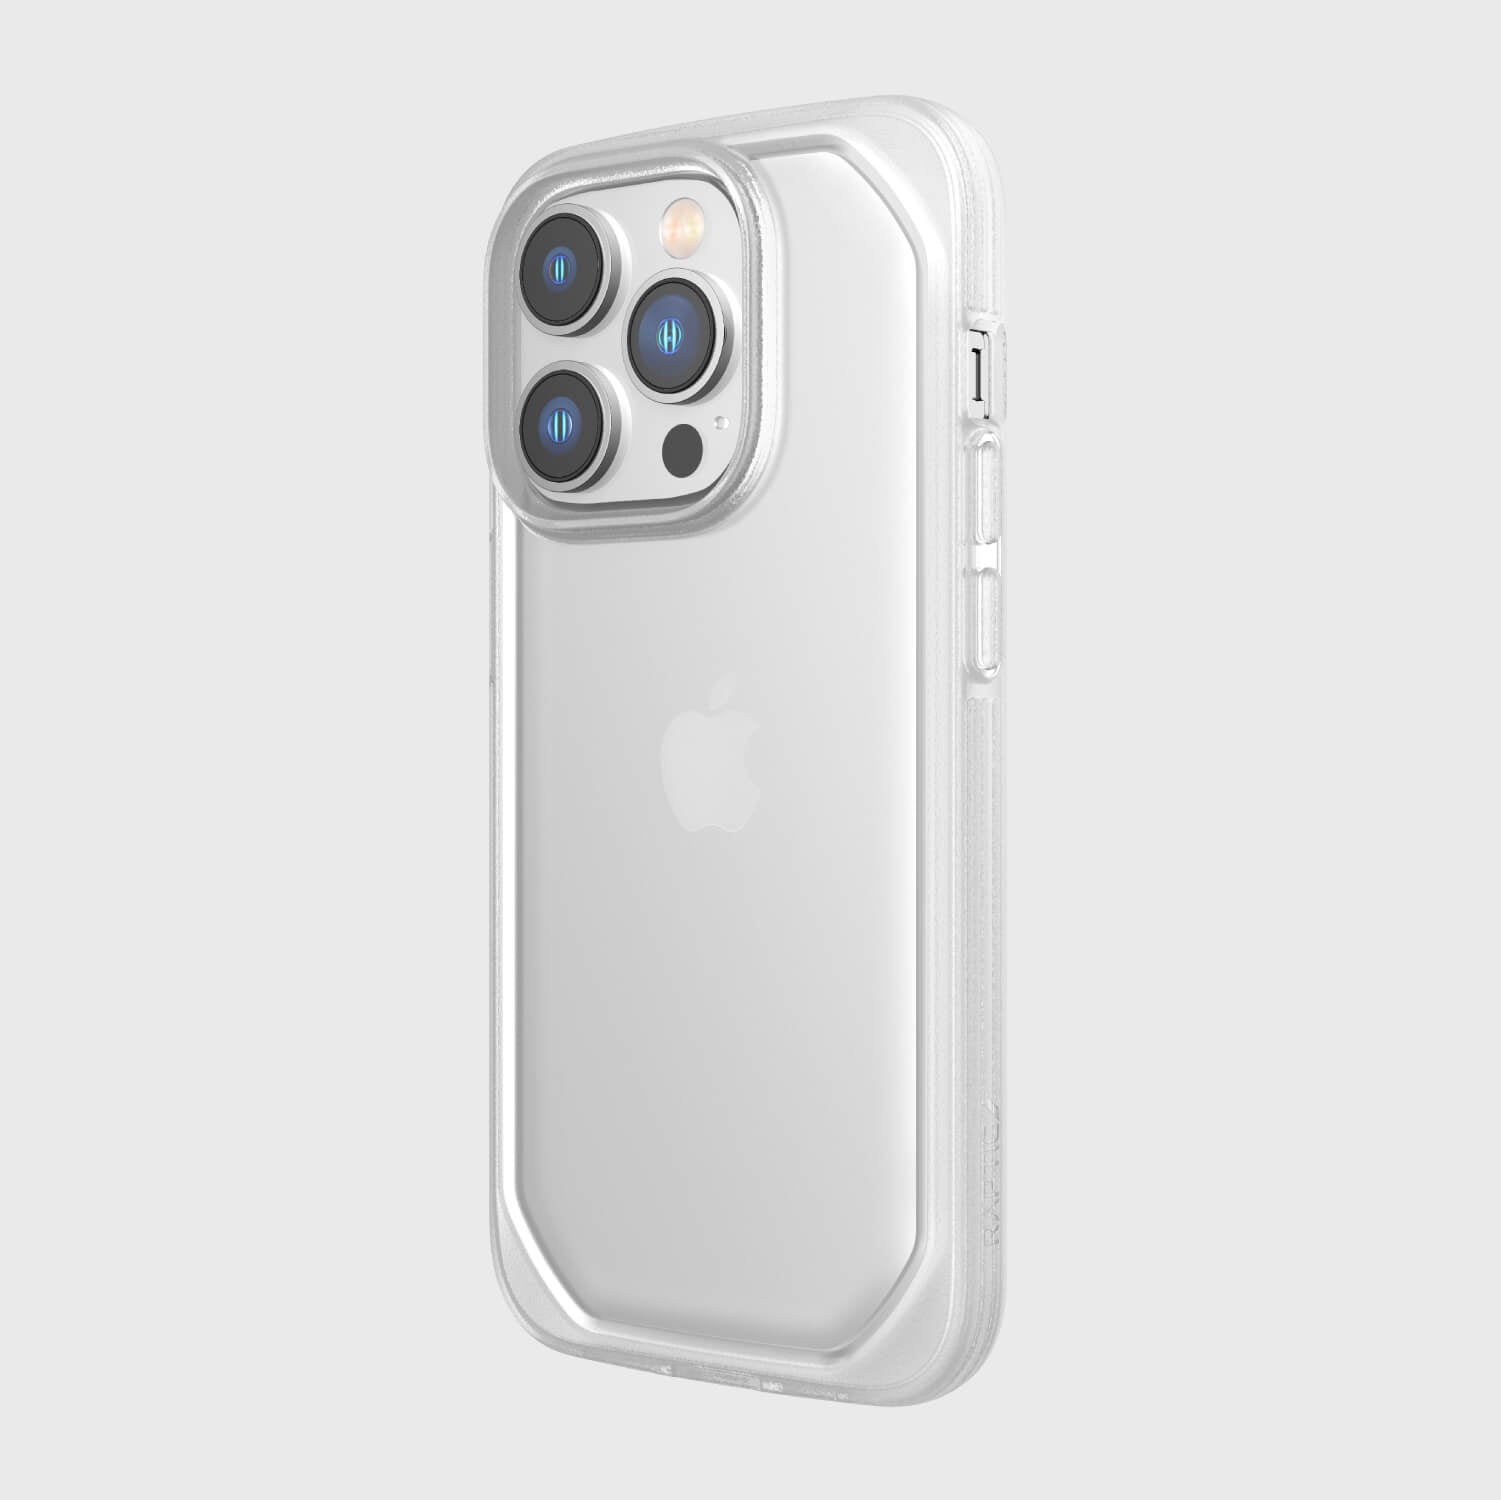 The back of the Raptic Slim & Sleek iPhone 14 Pro Case is shown in white, with Slim's 3 levels of texturing depth.